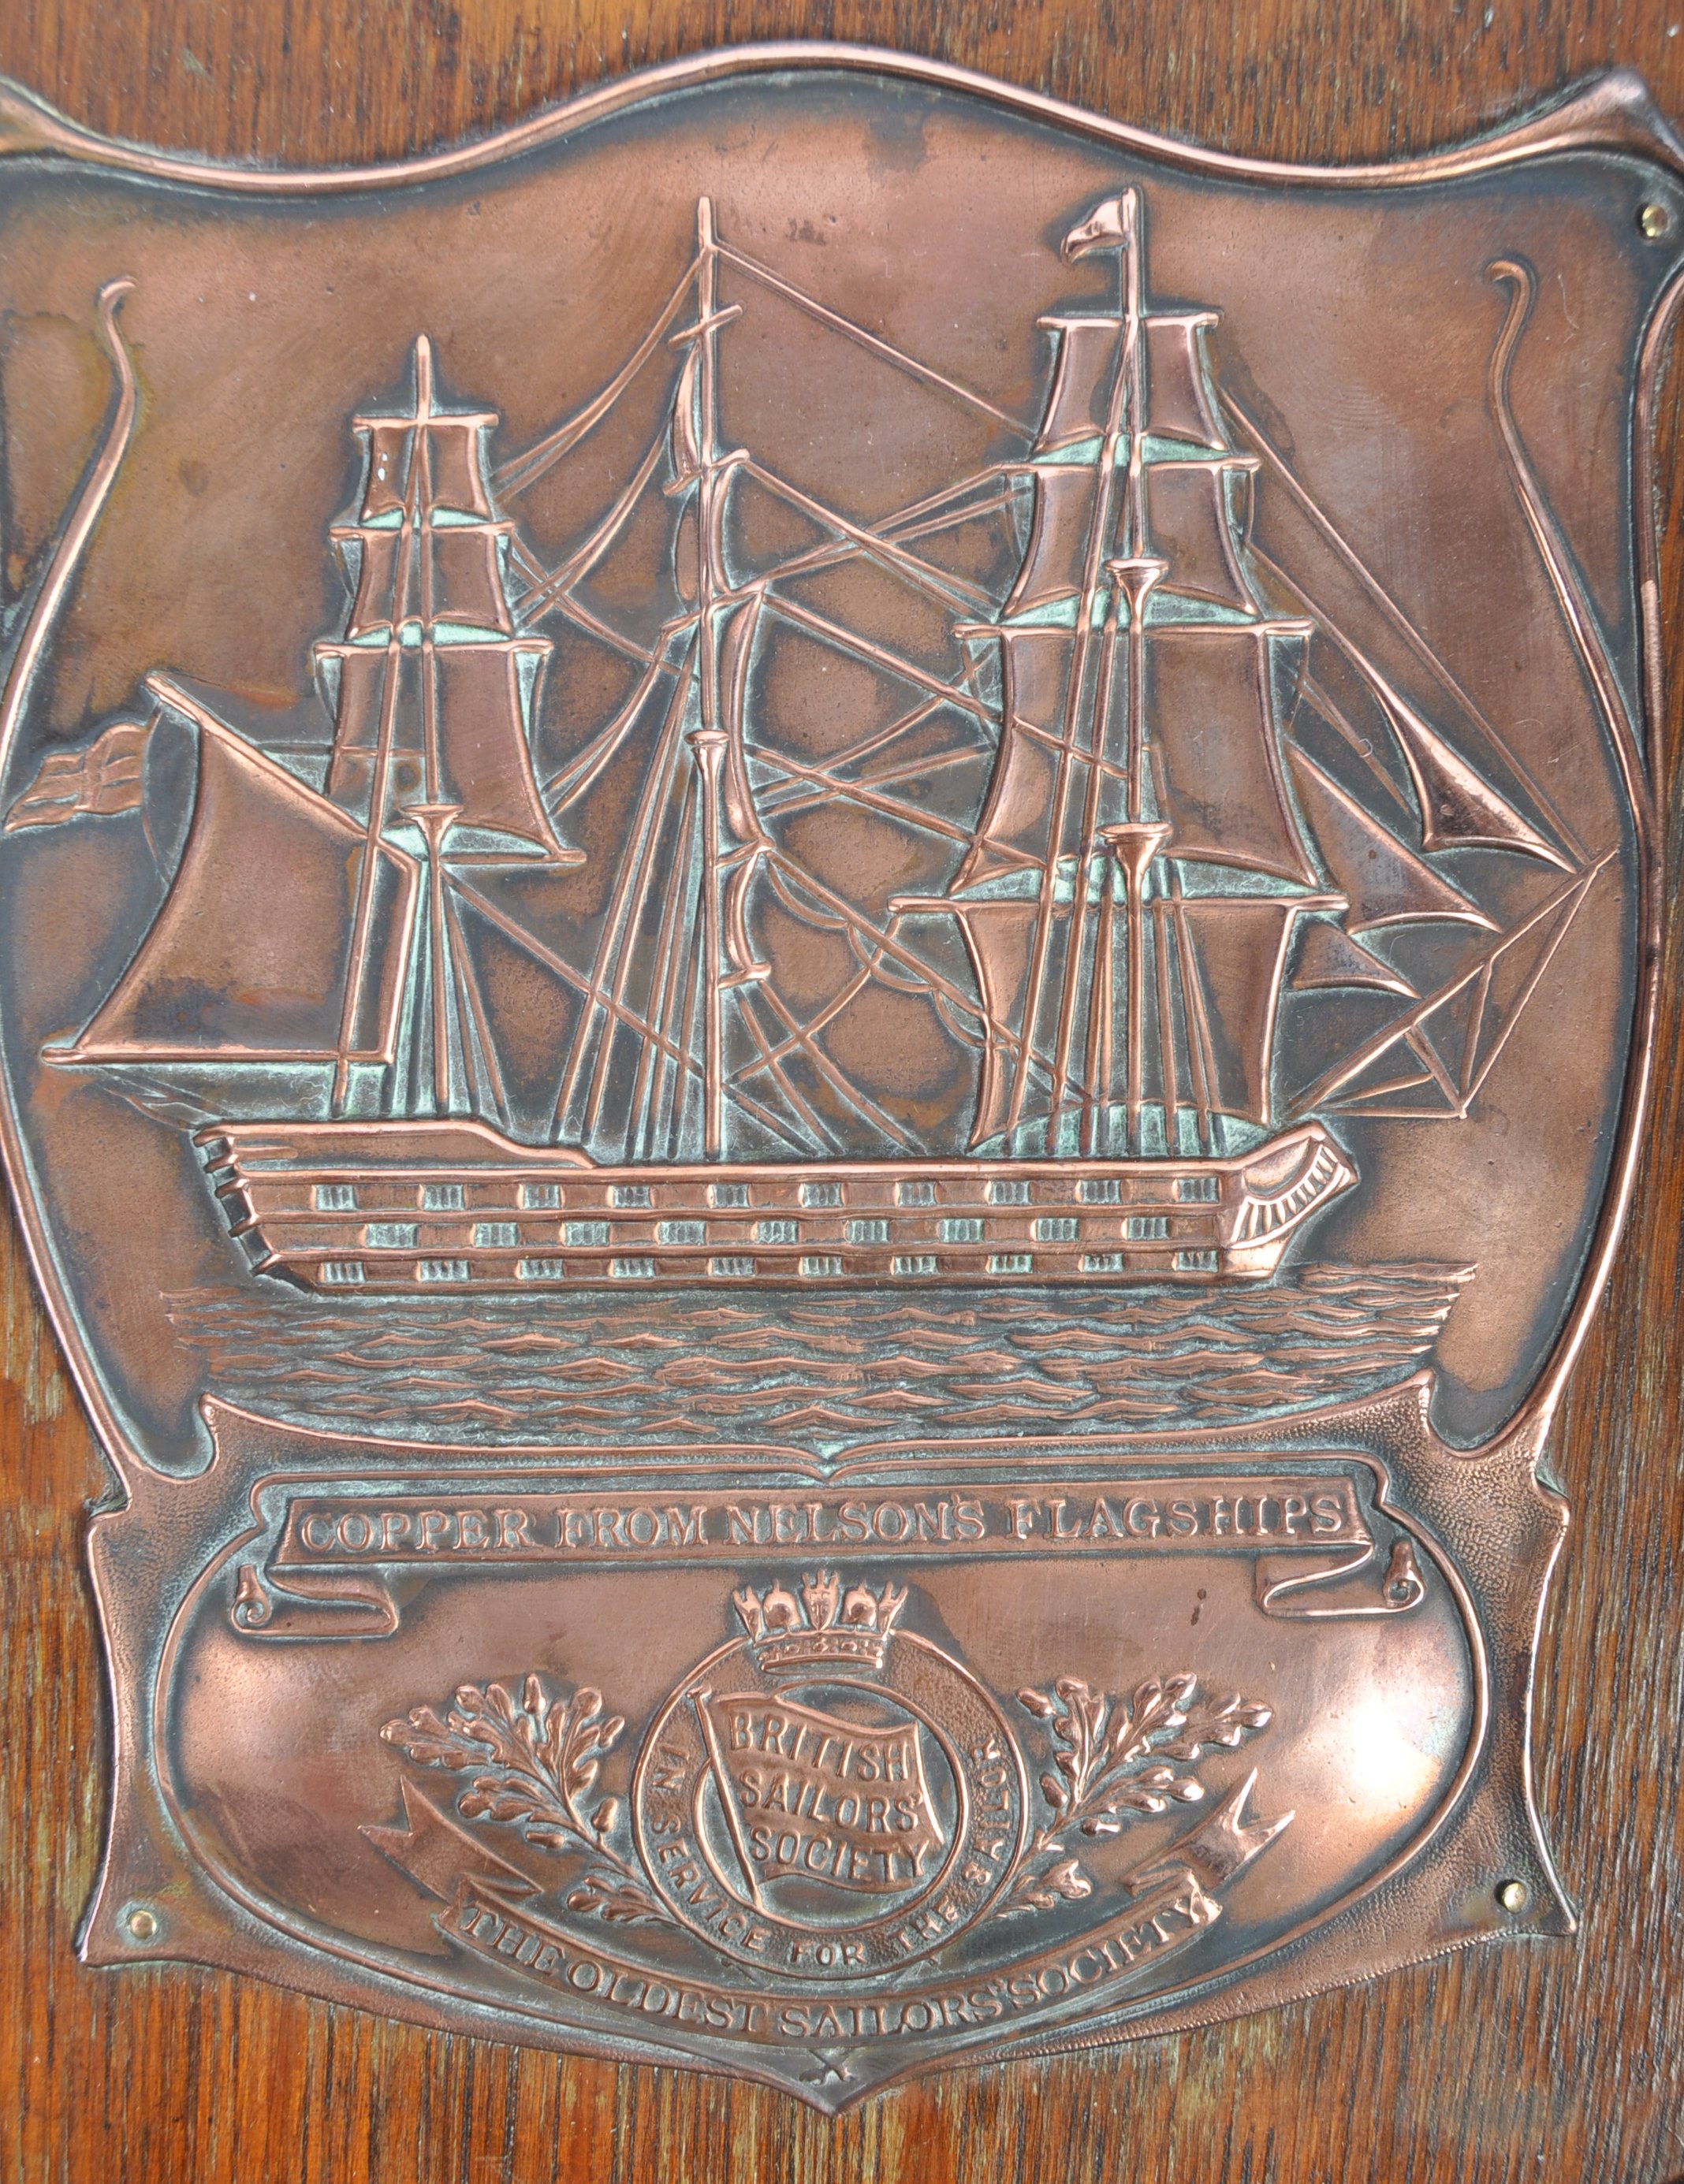 RARE COPPER PLAQUE MADE FROM NELSON FLAGSHIP COPPER - Image 2 of 4